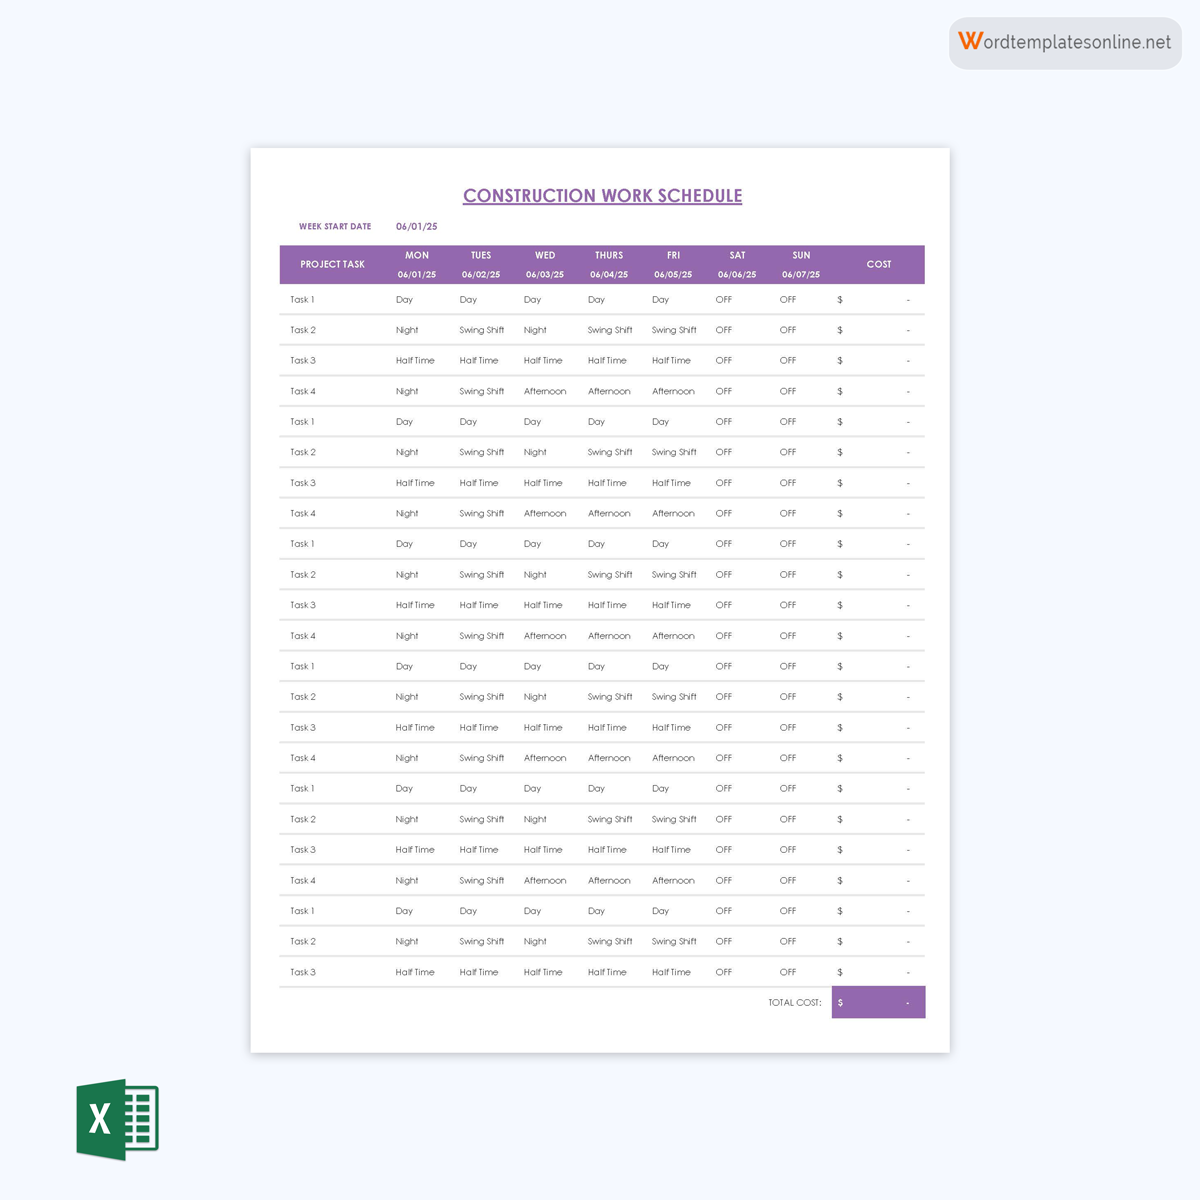 Free Printable Construction Work Schedule Template 01 as Excel Sheet